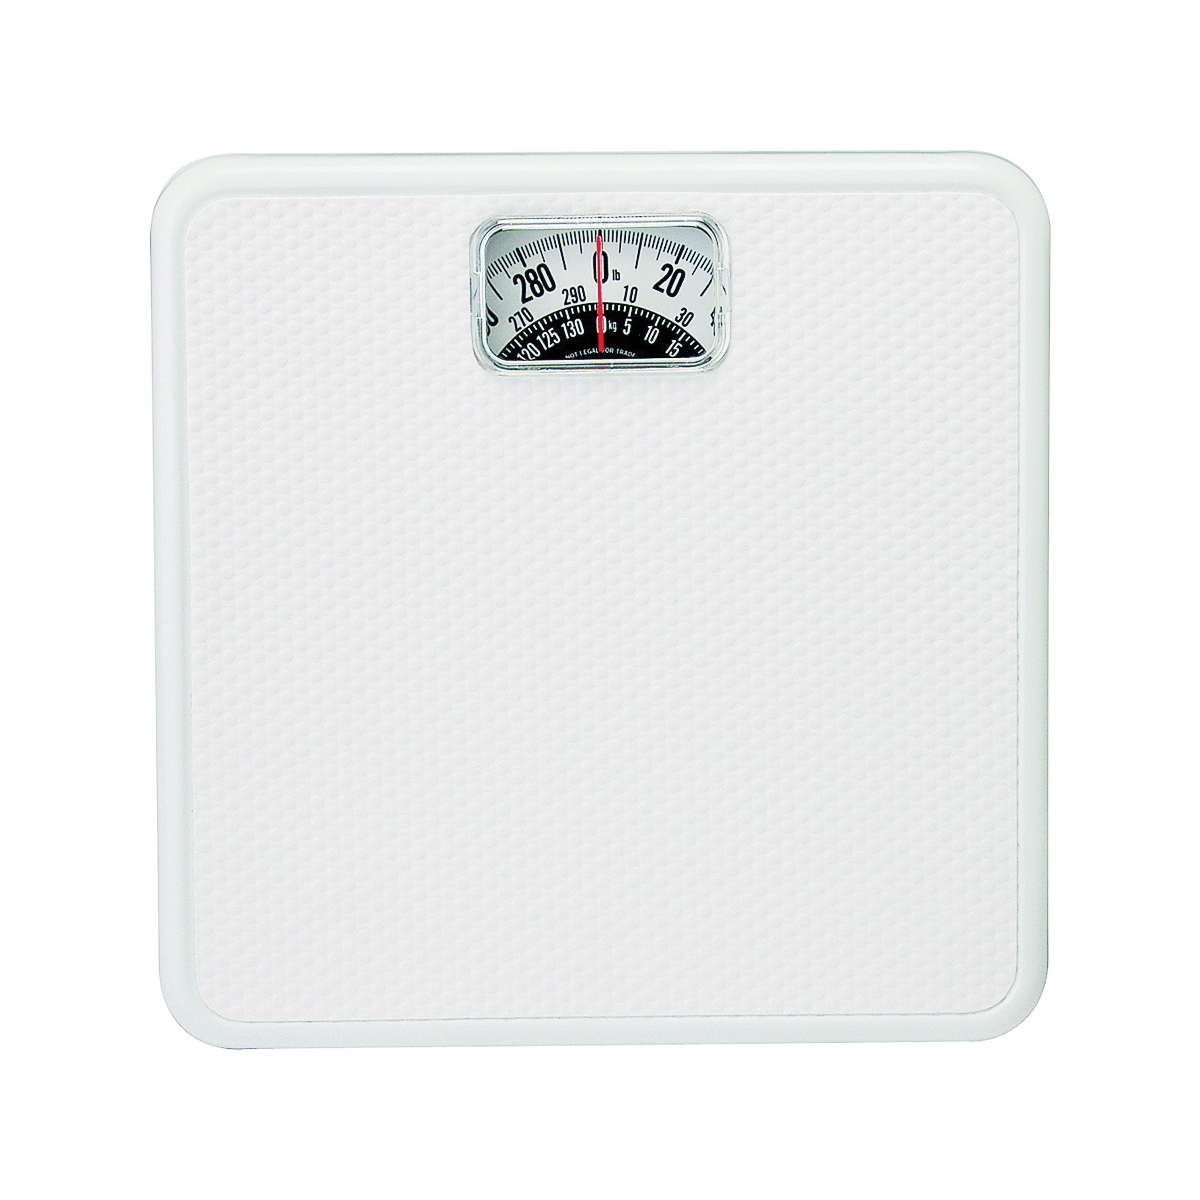 Taylor 20005014T Bathroom Scale, 300 lb Capacity, Analog Display, White, 10-3/4 in OAW, 10.3 in OAD, 1.8 in OAH - 1